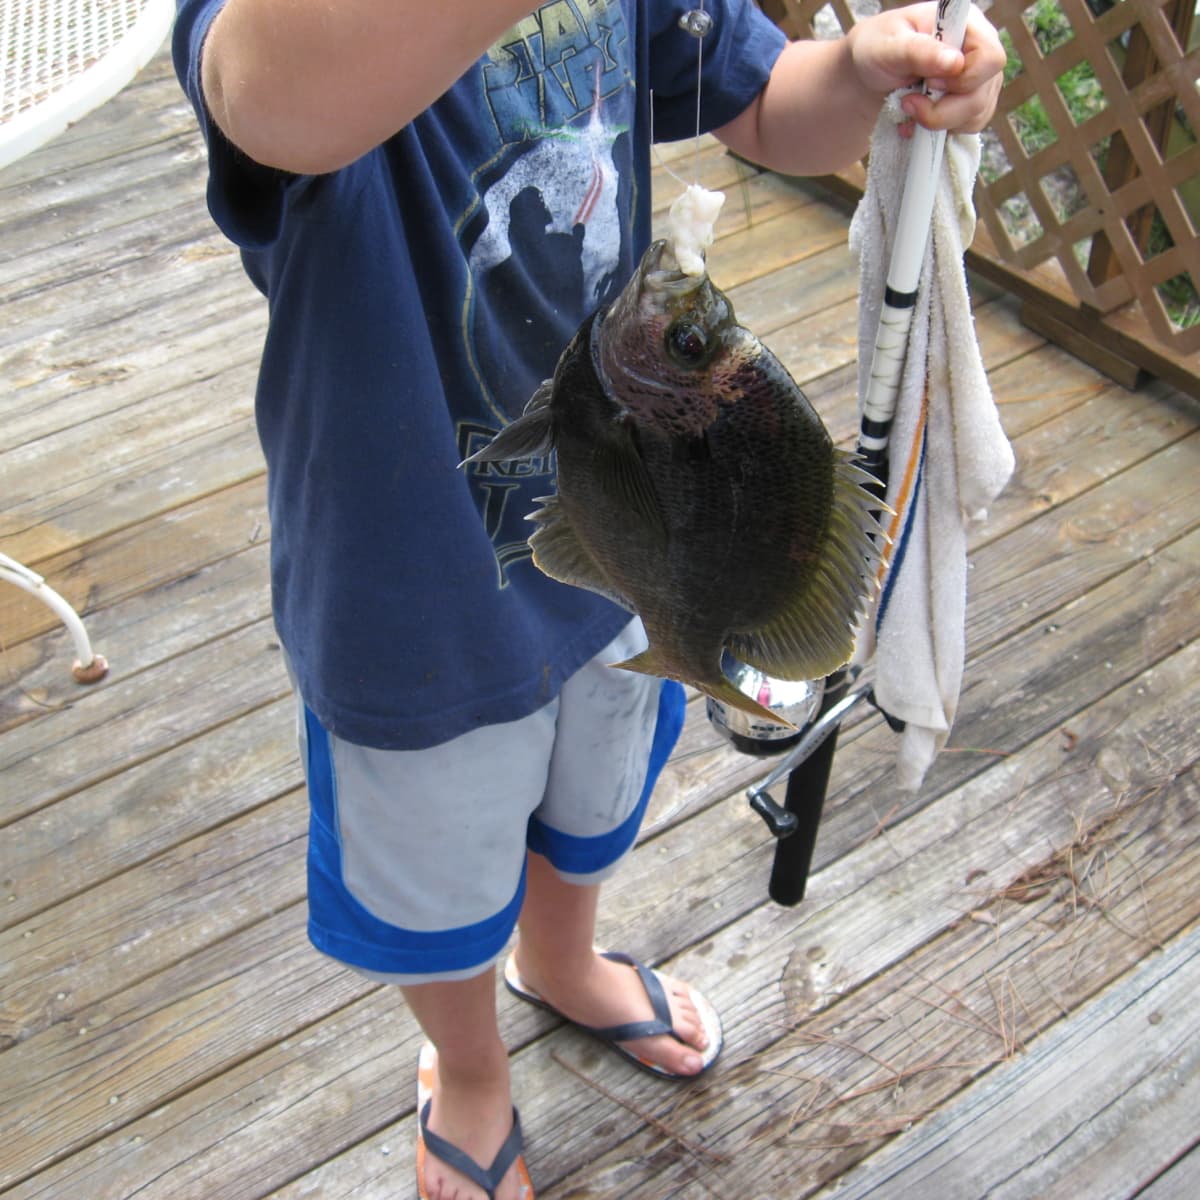 What's your favorite tried and true way to catch big bluegill? - Page 3